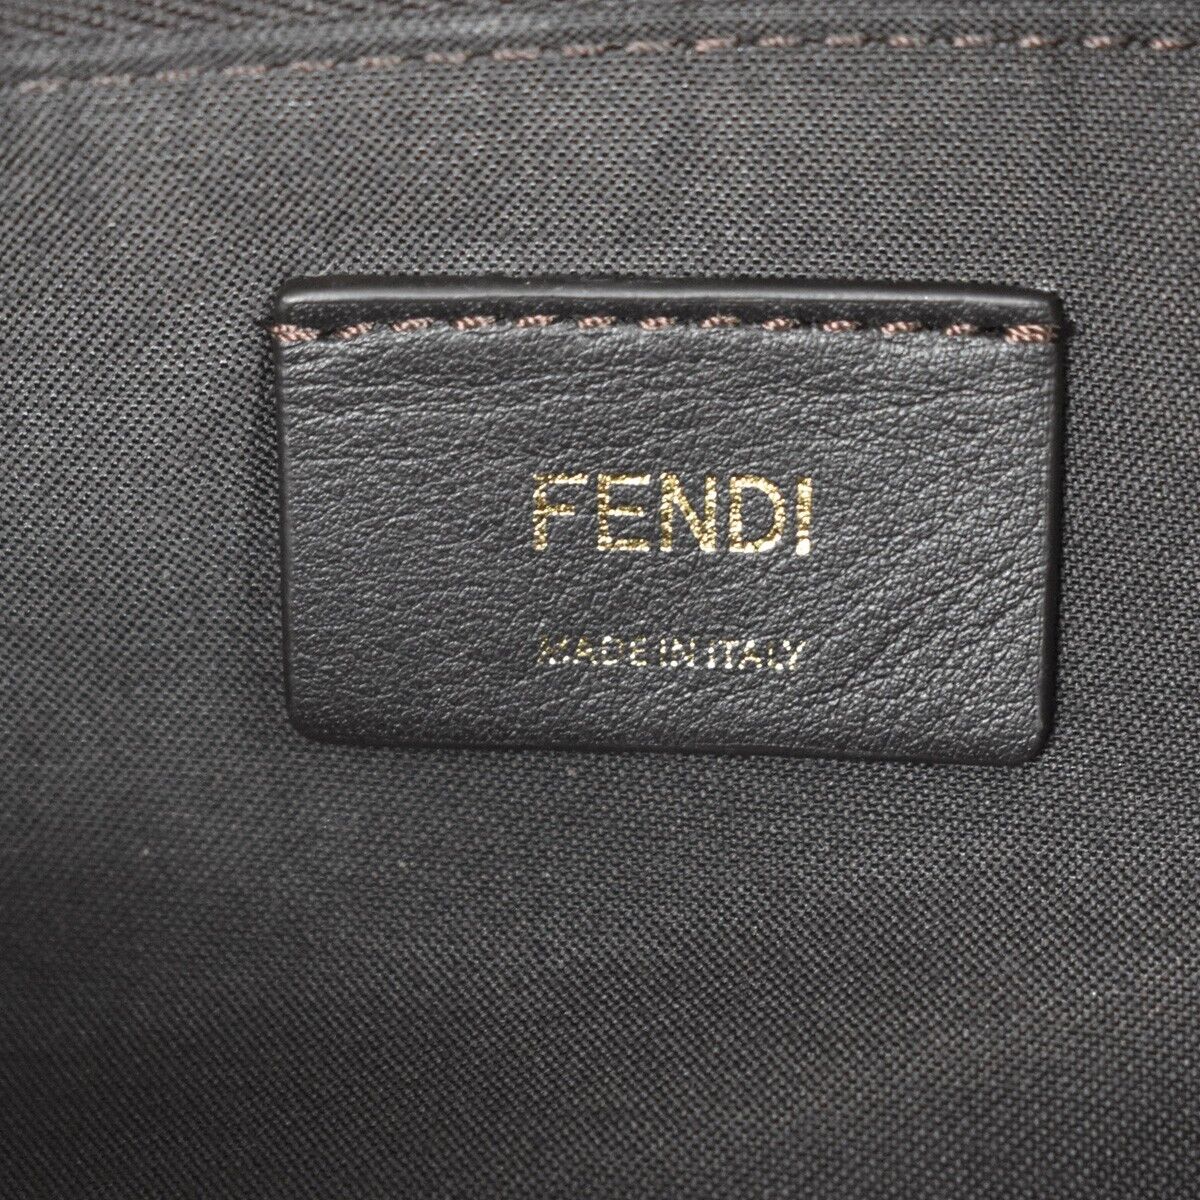 Fendi By The Way Beige Leather Handbag (Pre-Owned)